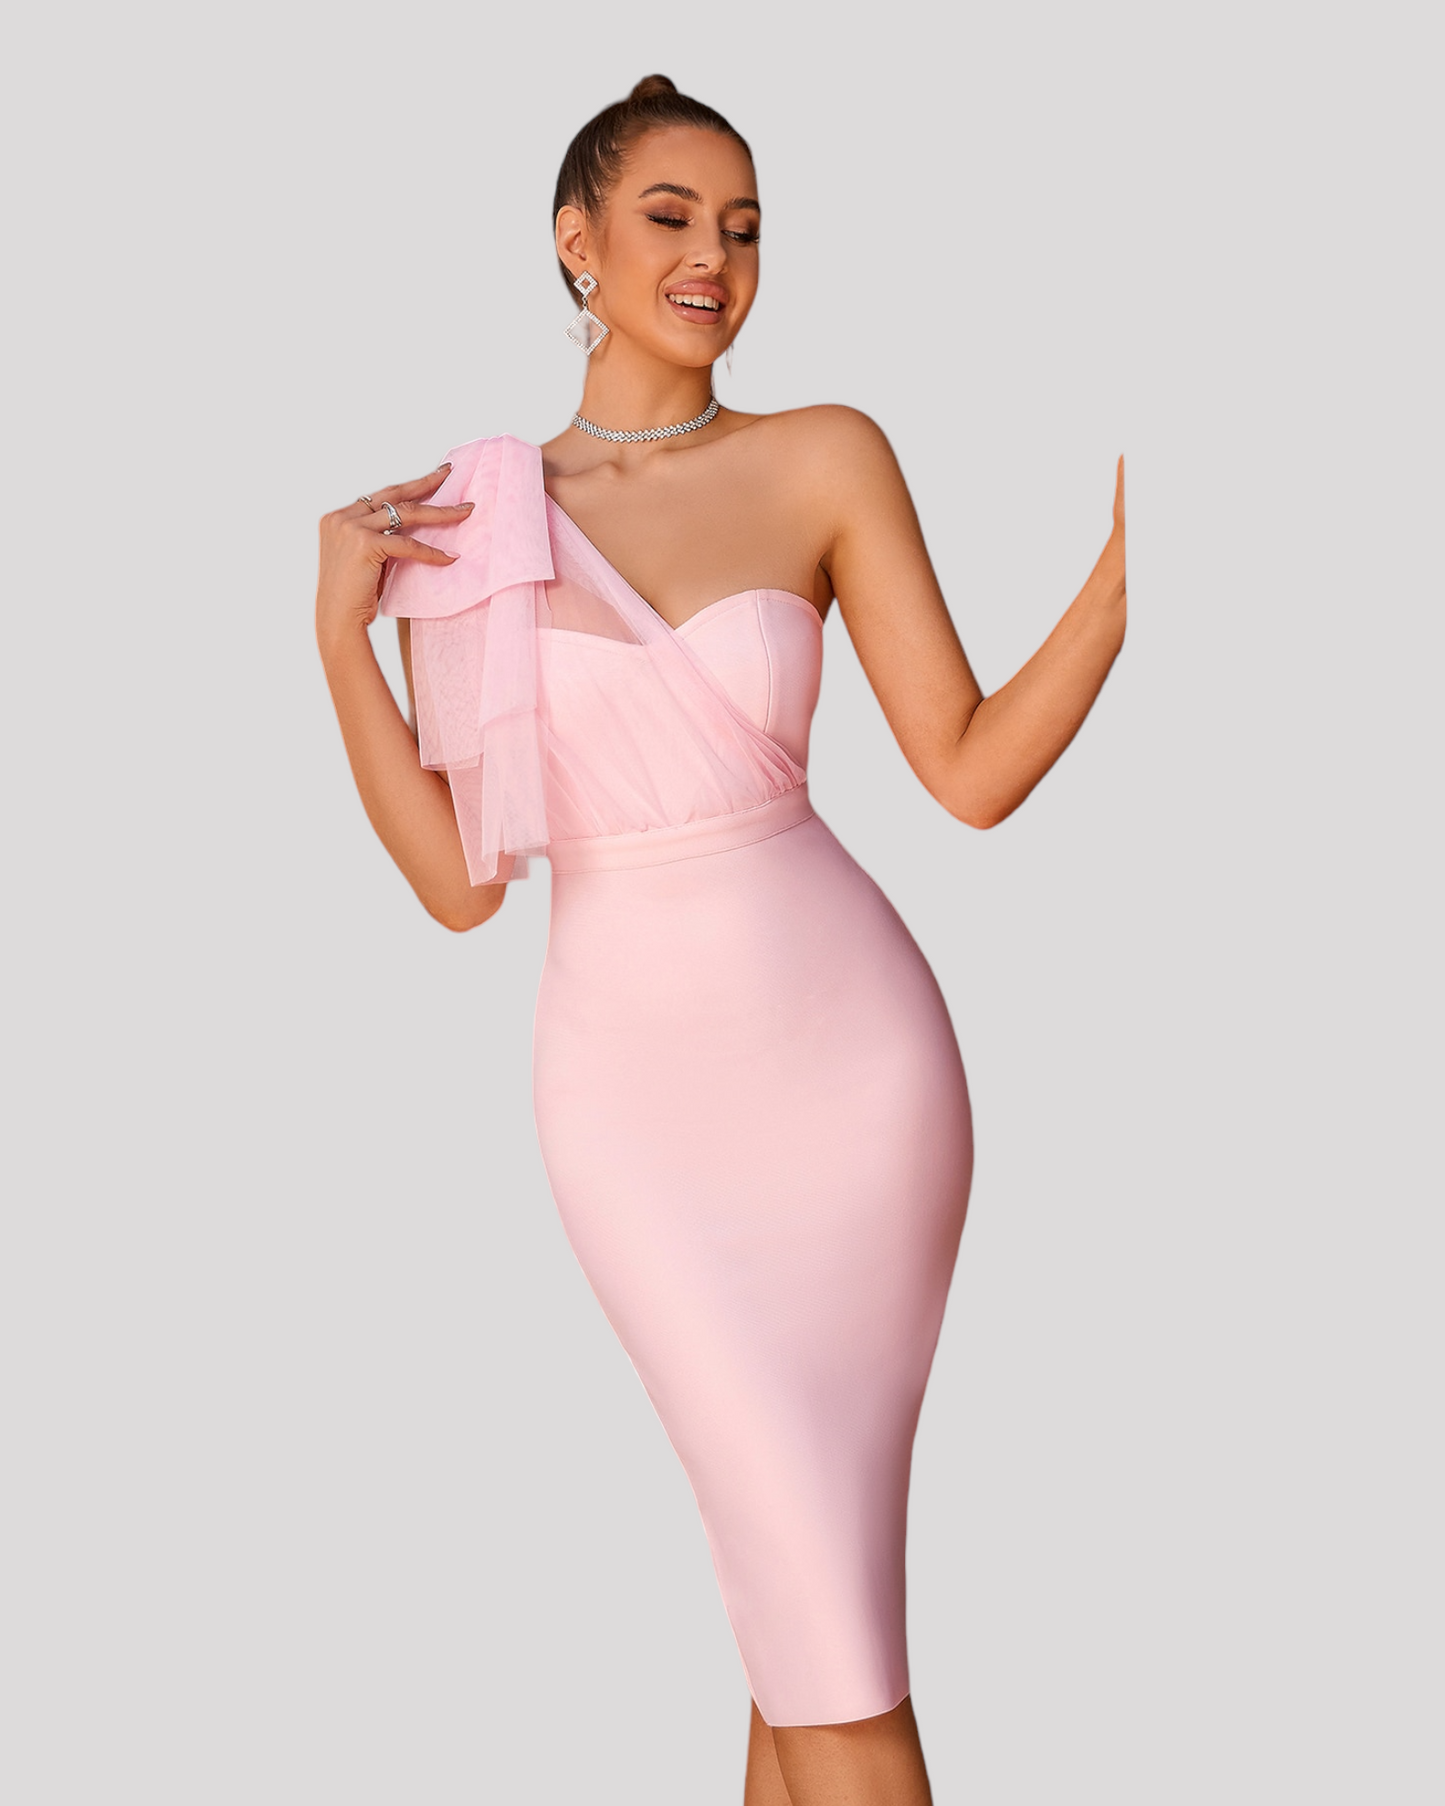 One Shoulder Bow, Strapless Cocktail Dress available in 3 colours